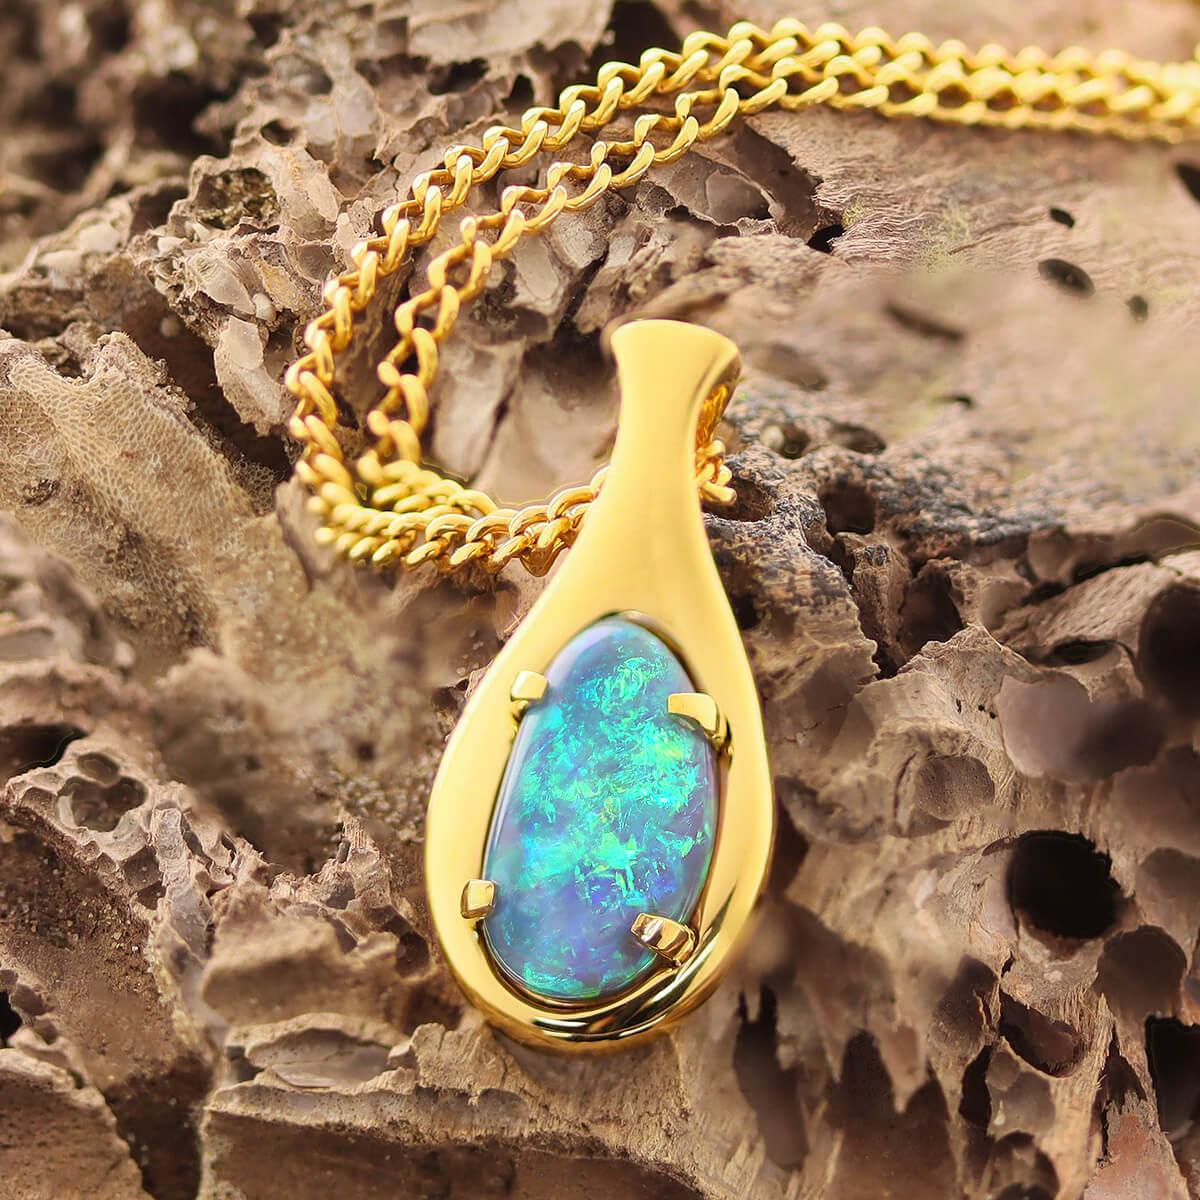 They say those who love blue-green opals have a calm spirit and intelligent mind. Well, that was proven true the minute you selected this piece. A very bright black opal that has colour in every direction and shows deep purple, bright blues and